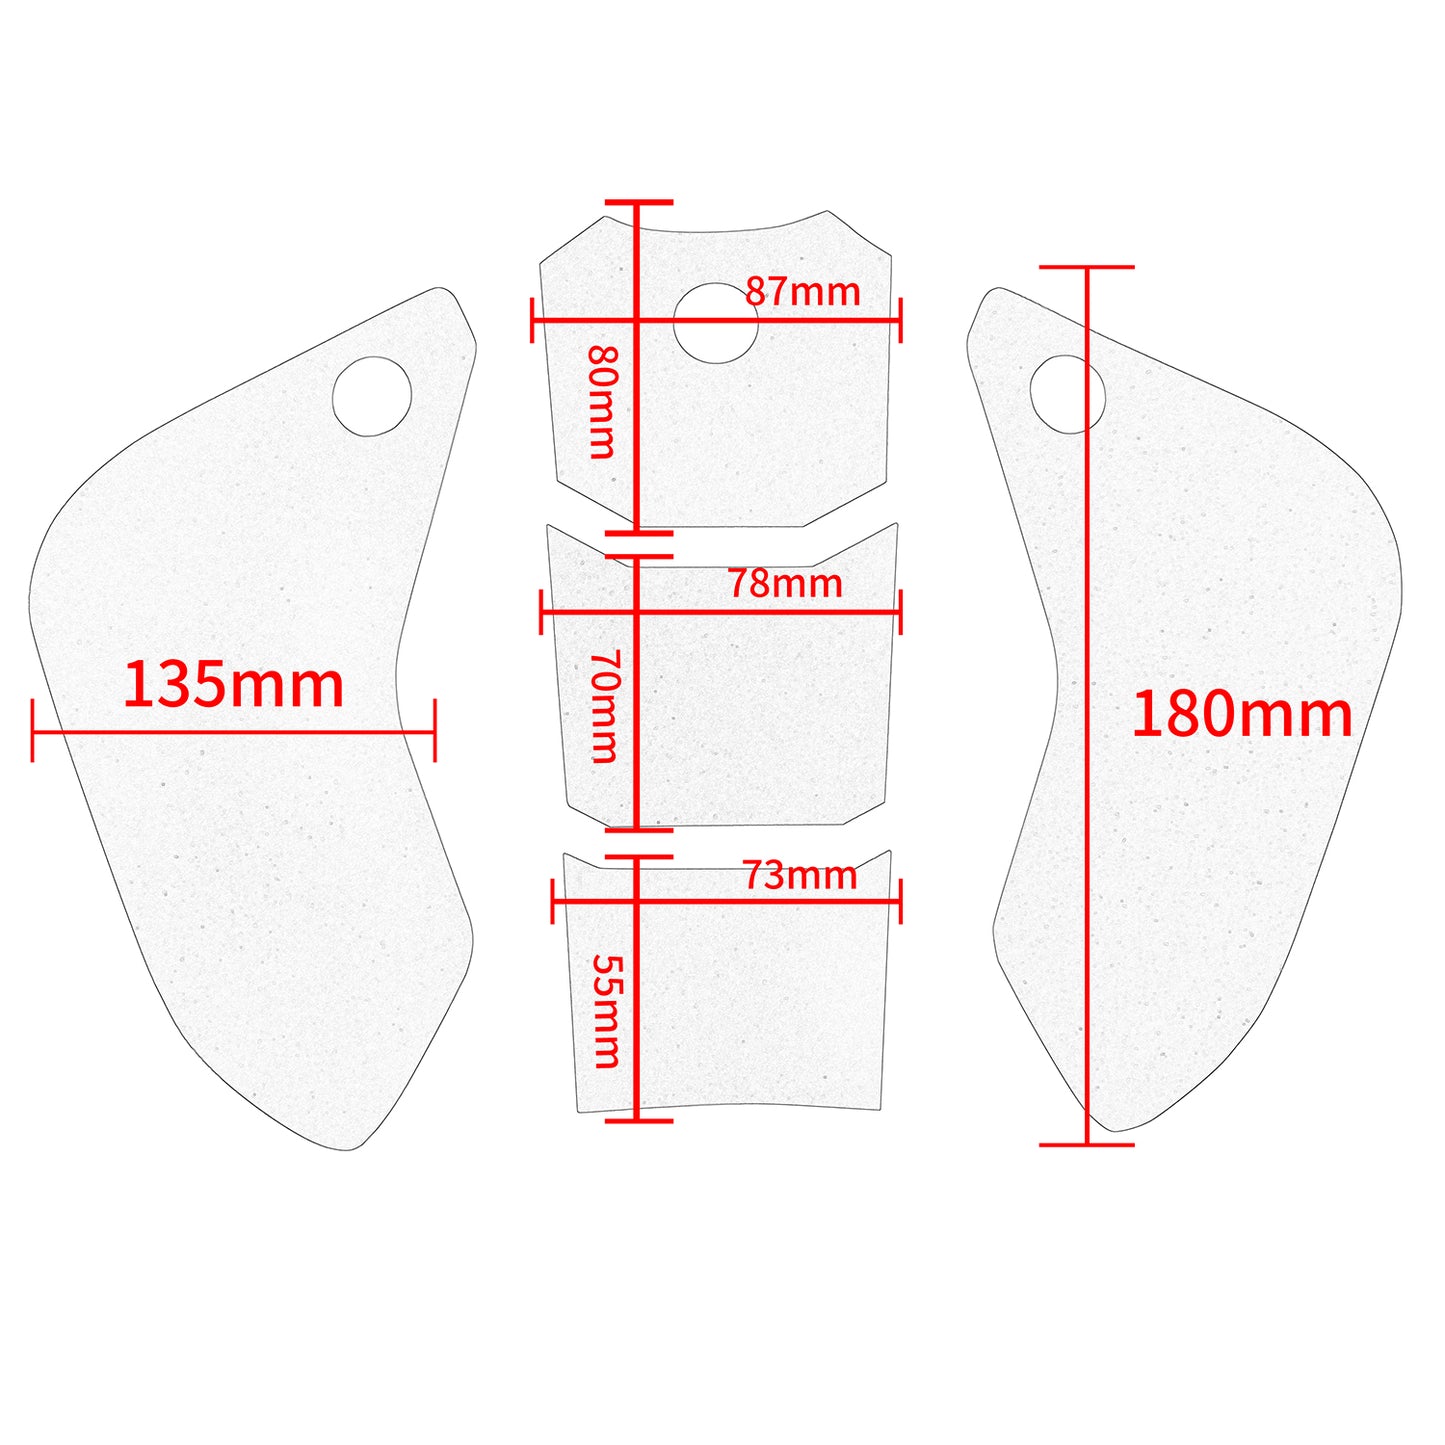 Wolfline Motorcycle Anti Slip Tank Pad Stickers Side Gas Tank Pad Knee Grip Decals Protection For BMW F900R F 900R 2019 2020 2021 2022